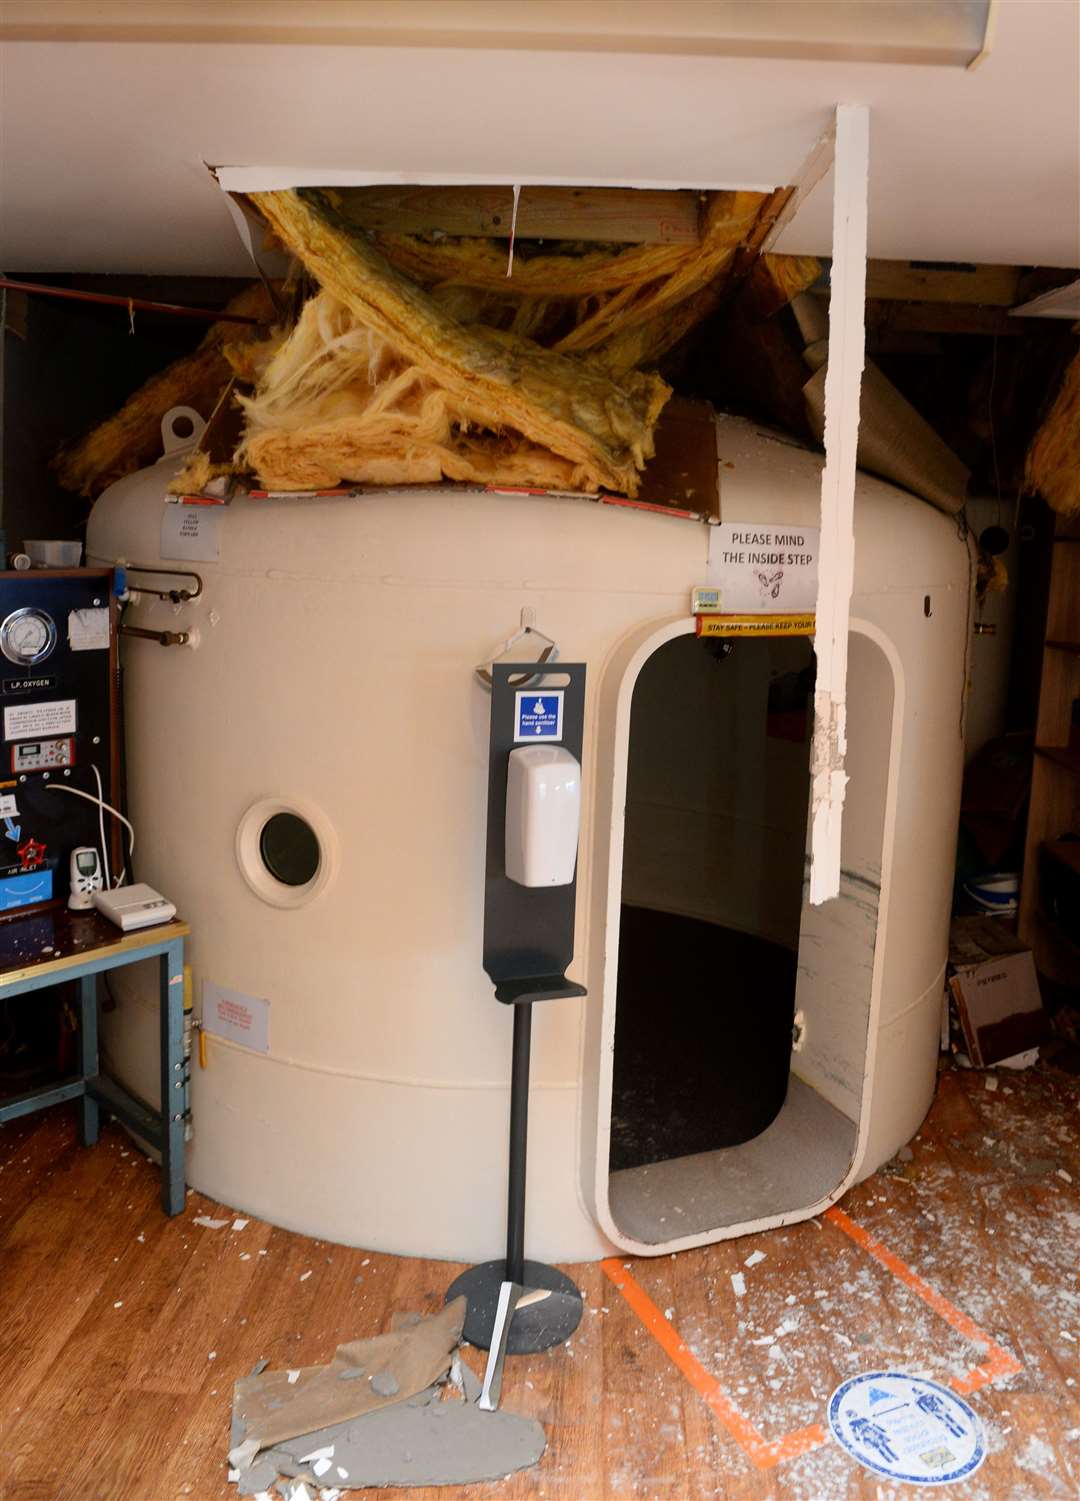 The hyperbaric oxygen chamber appears to be intact.